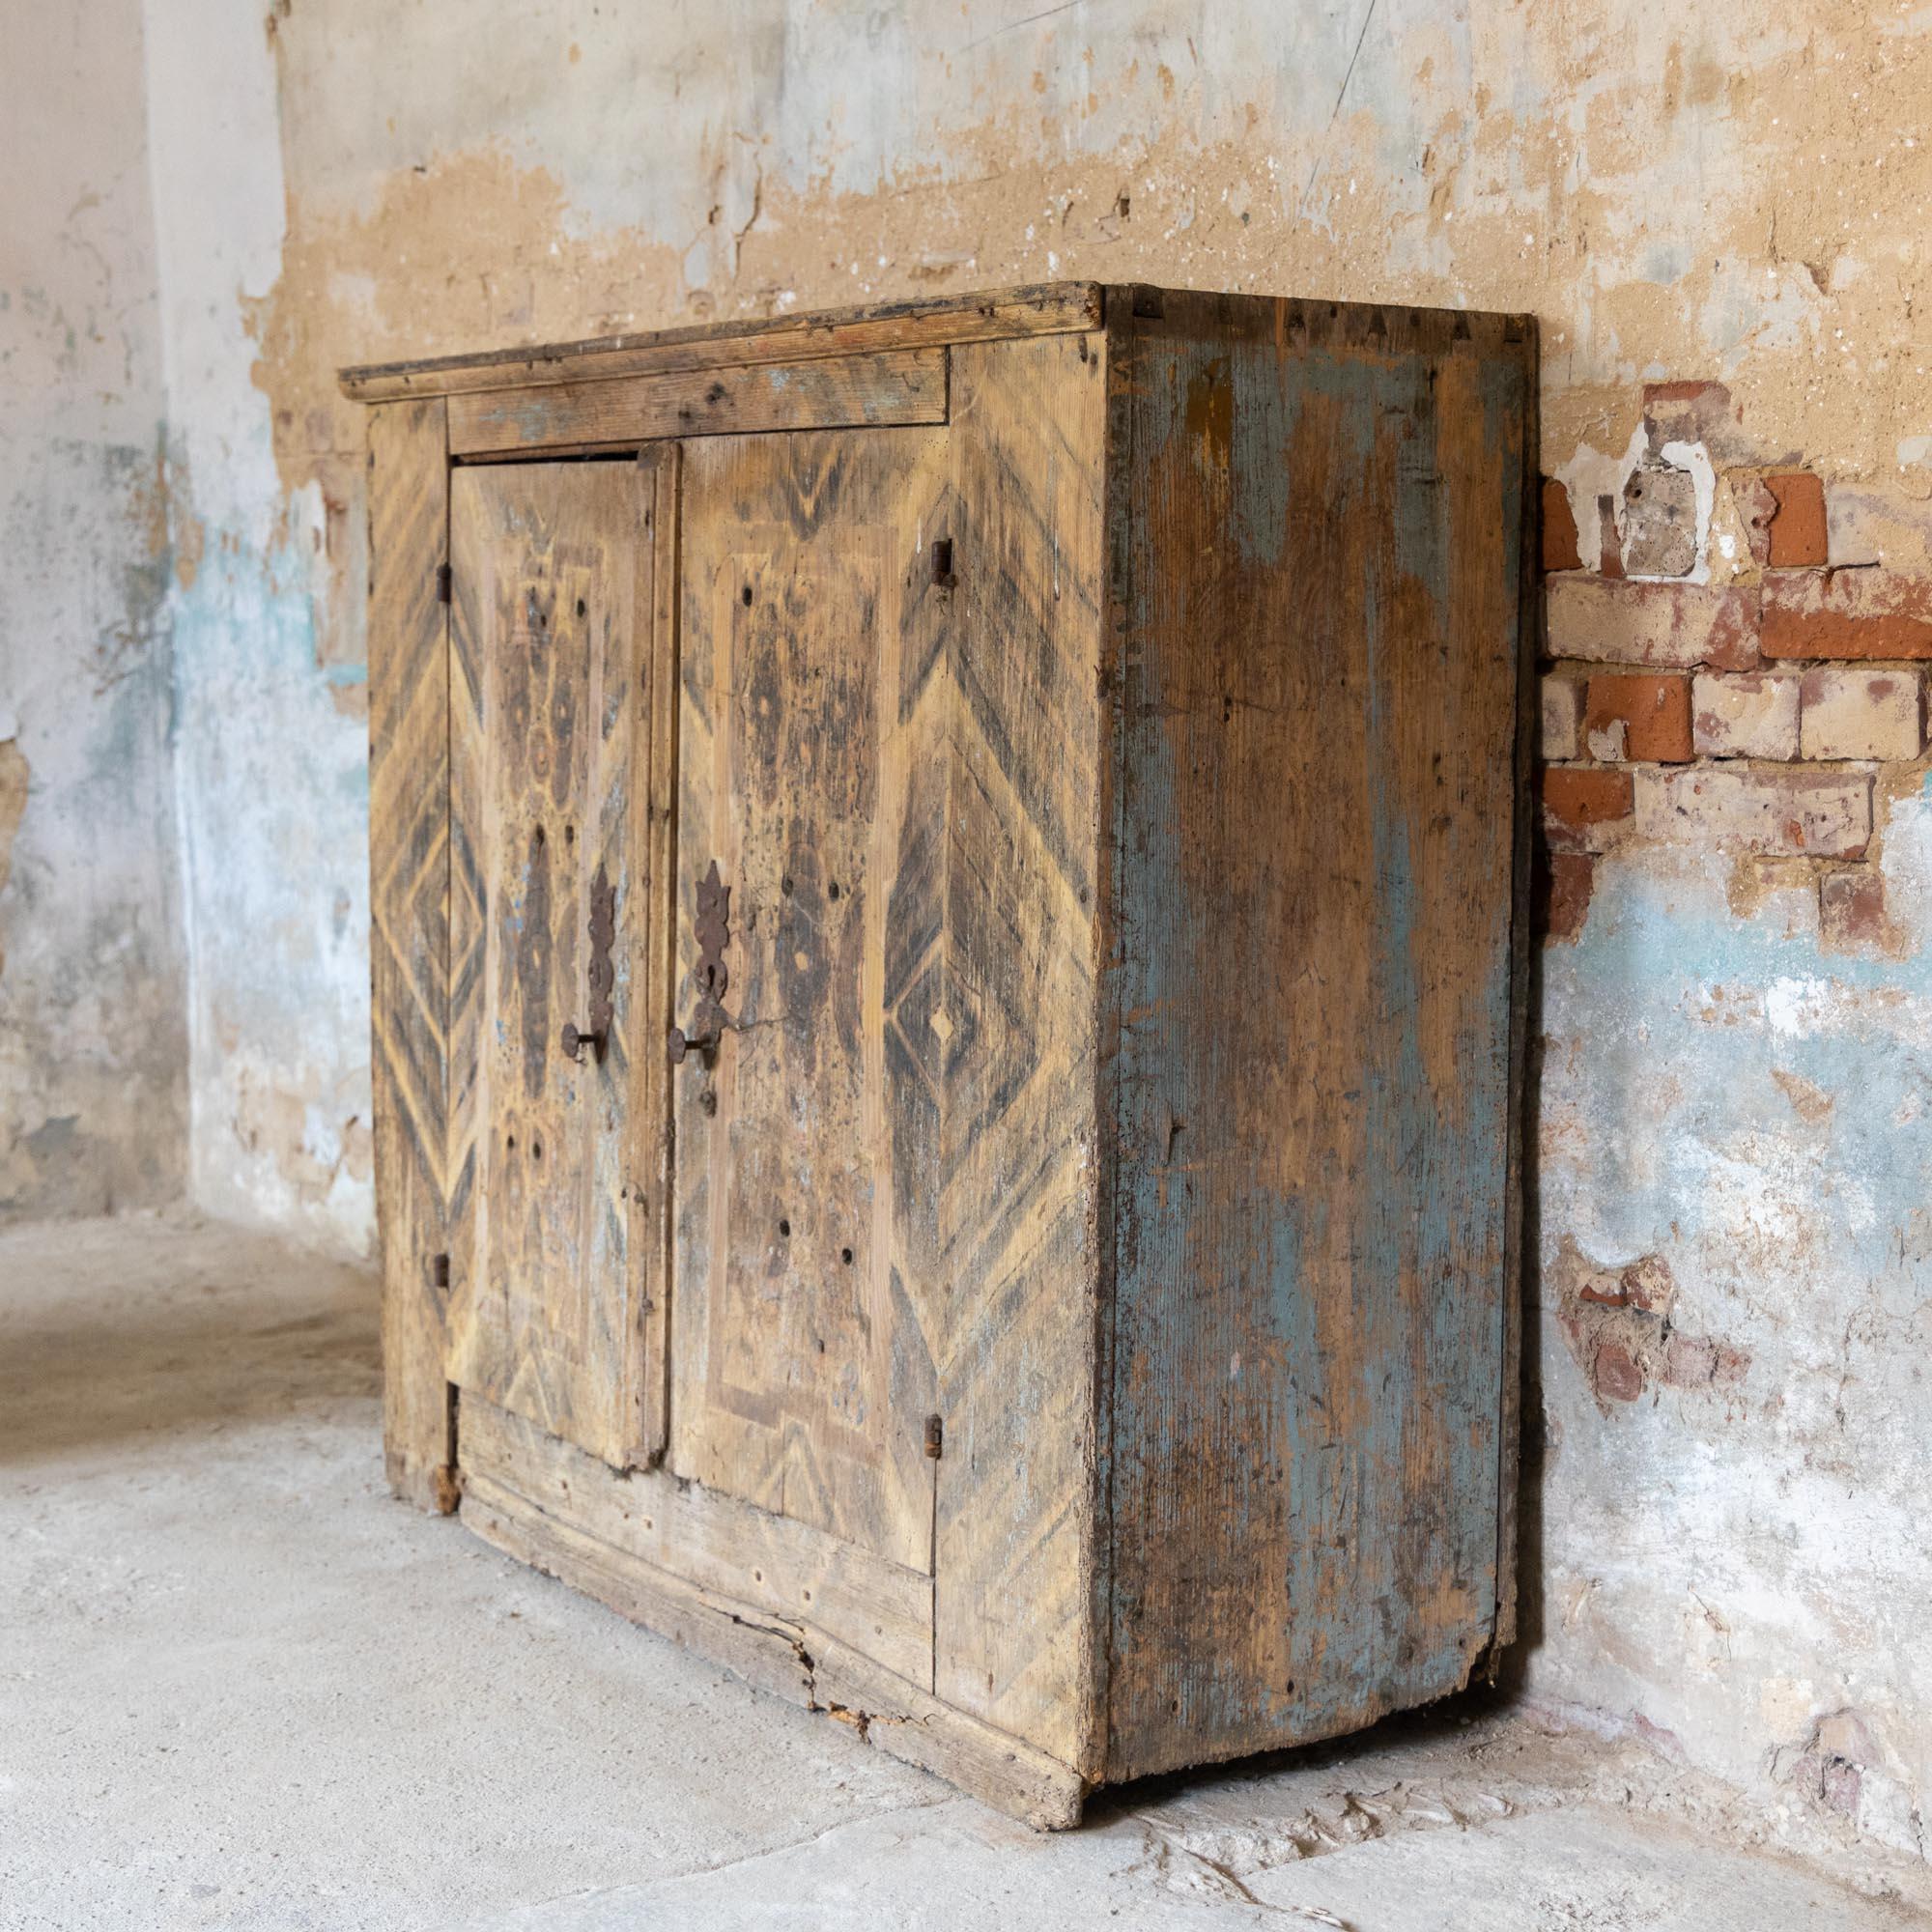 Two-door half cupboard of solid oak with wavy cut iron fittings and remnants of the old painting.